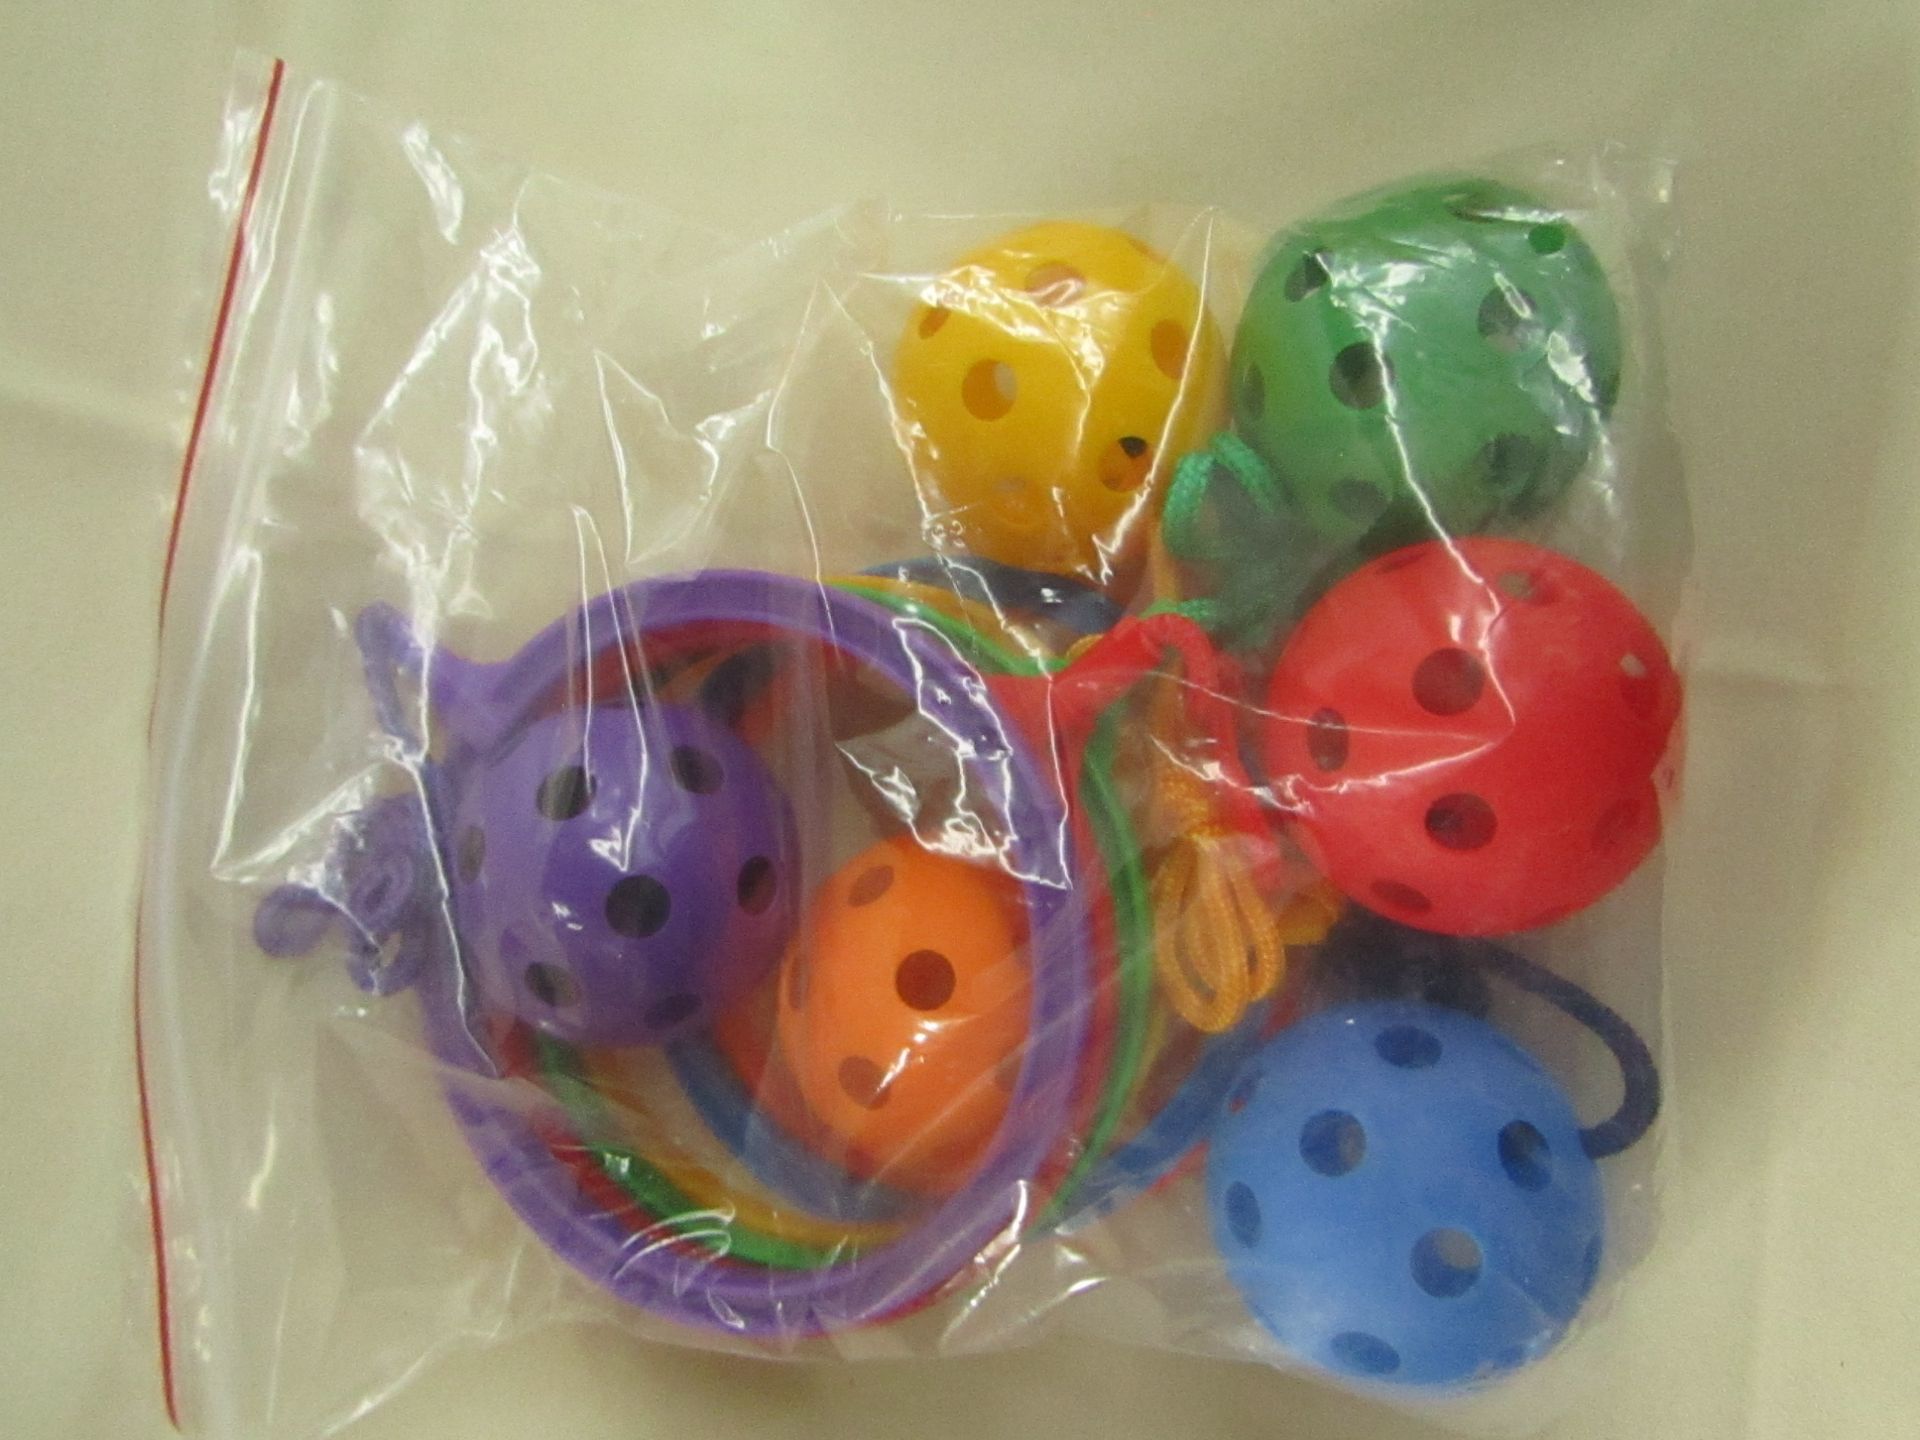 Childrens Fittness Swingball Game ( 6-Pieces Per Pack ) - Assorted Colours - Unused & Packaged.